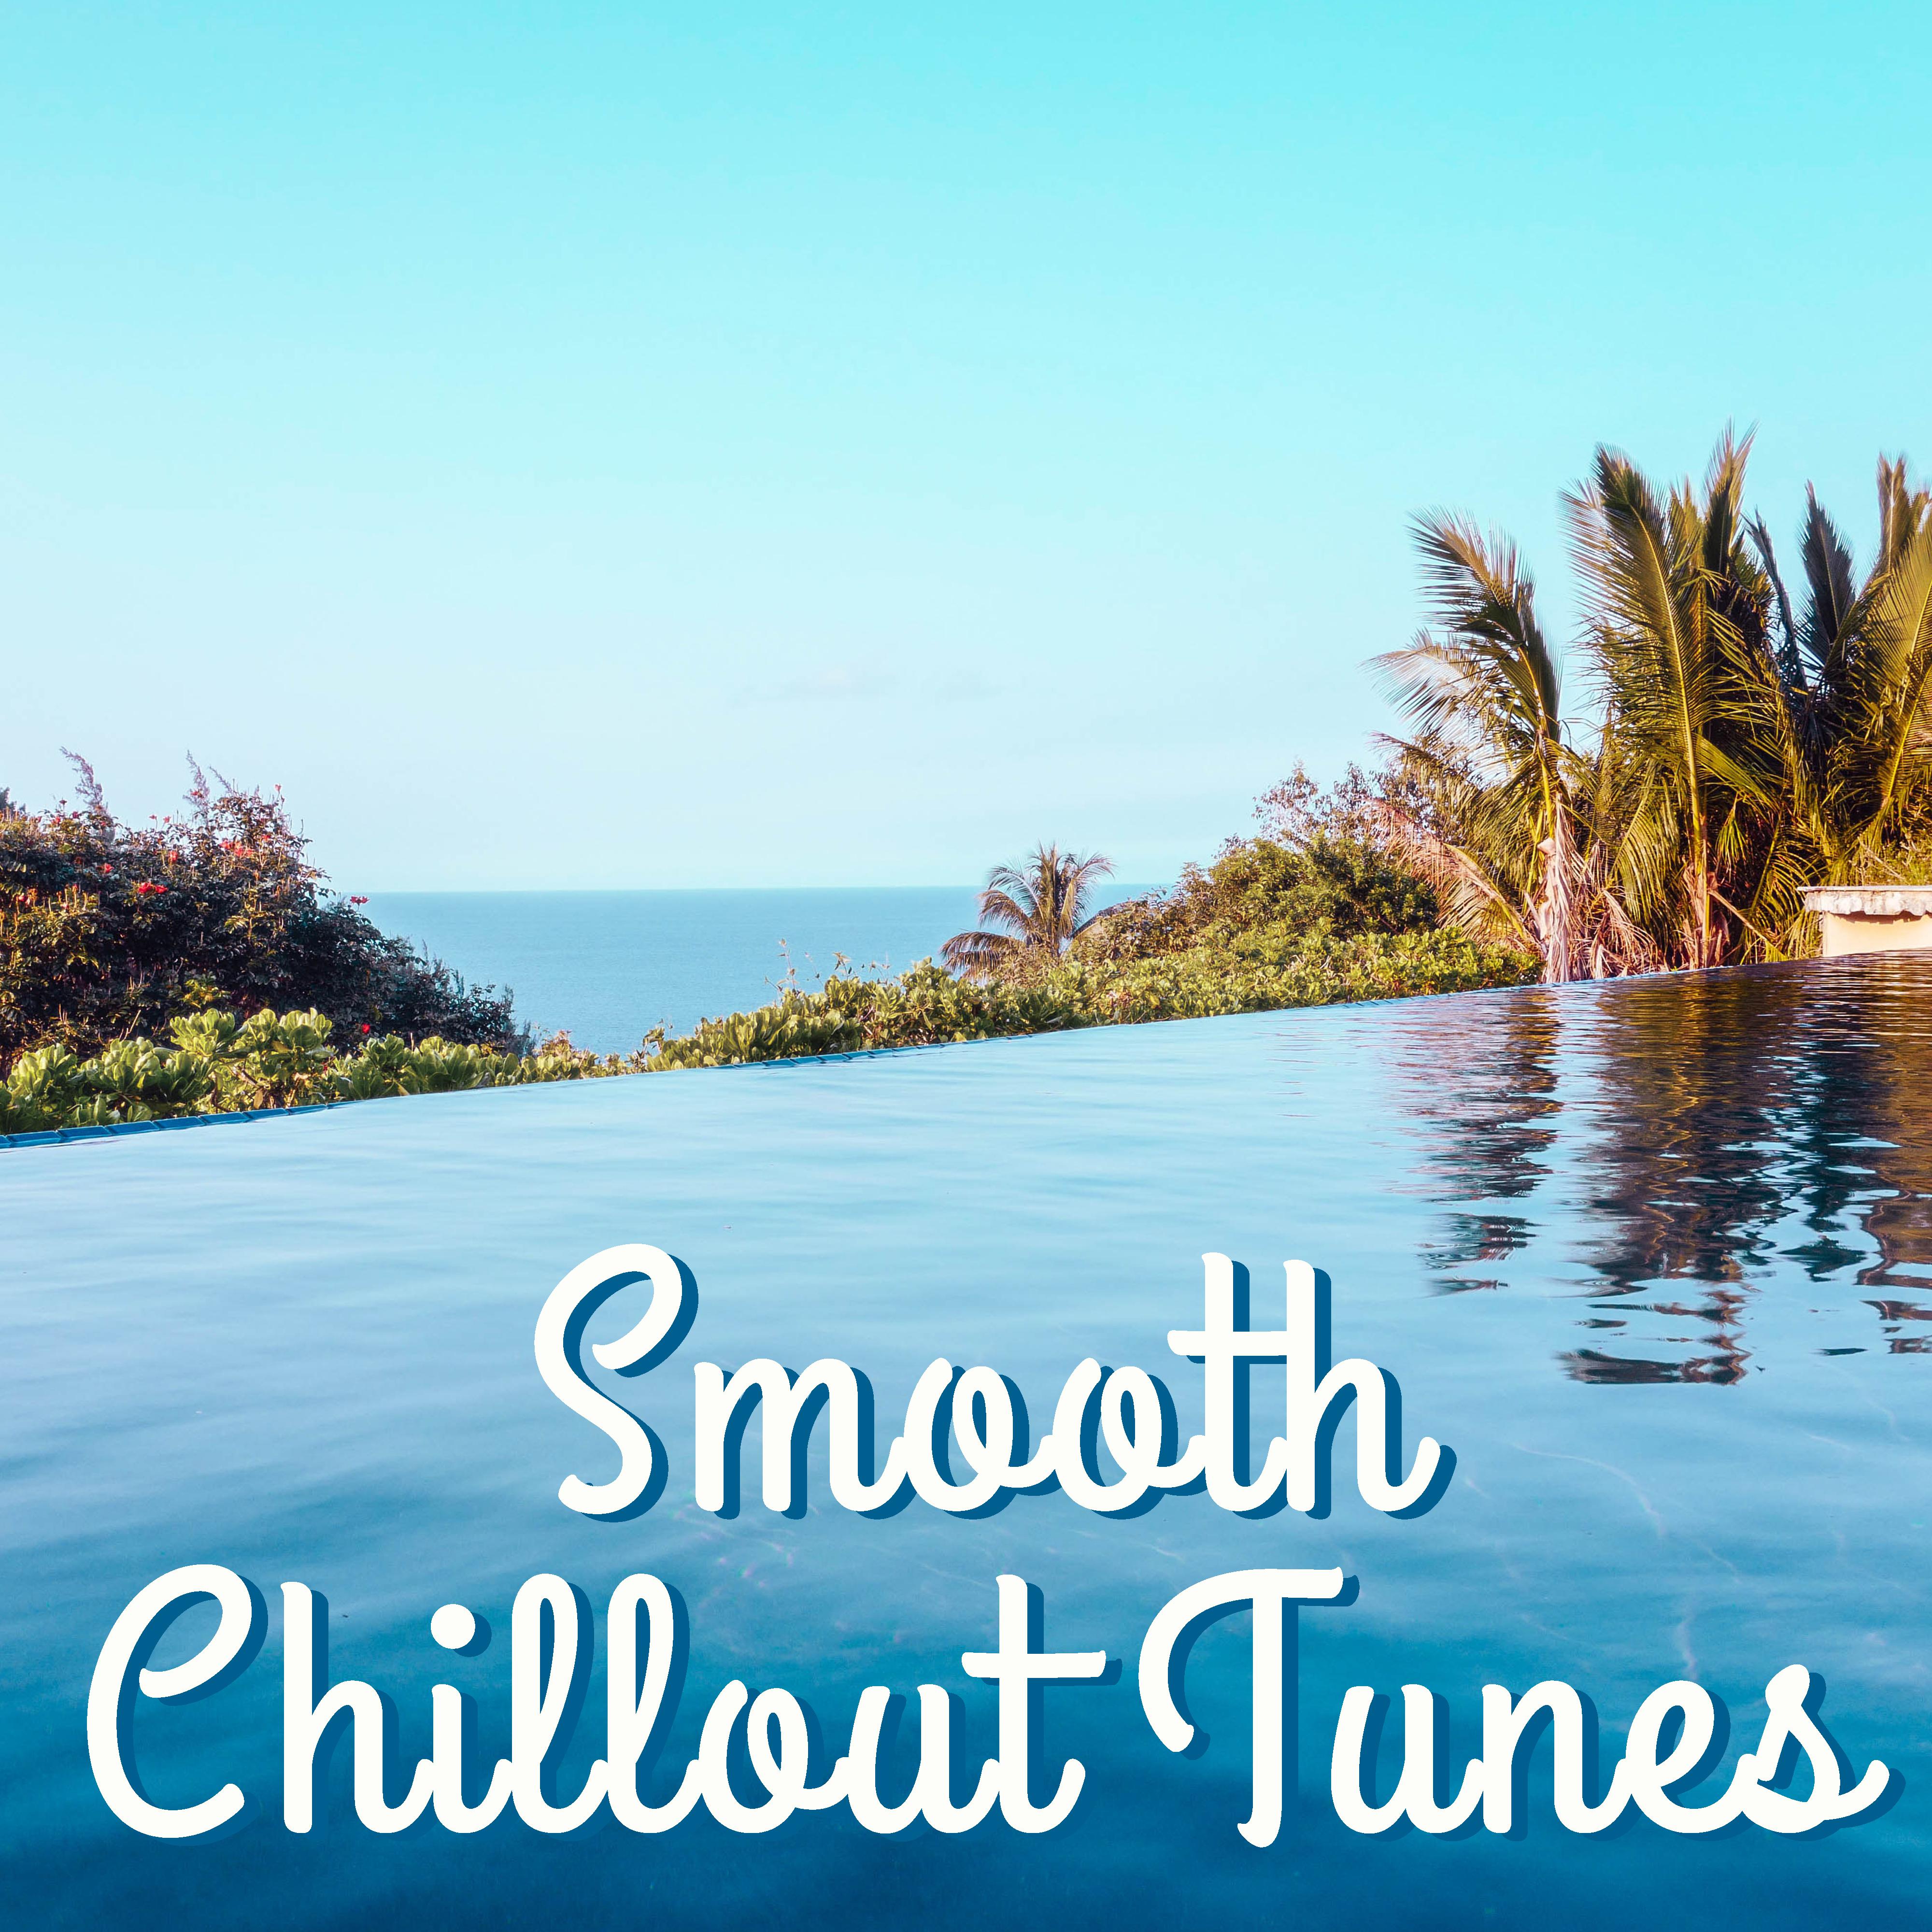 Smooth Chillout Tunes – Ibiza Dance Party, Beach Chill, Sensual Vibes, Deep Lounge, Summertime, Ibiza 2017